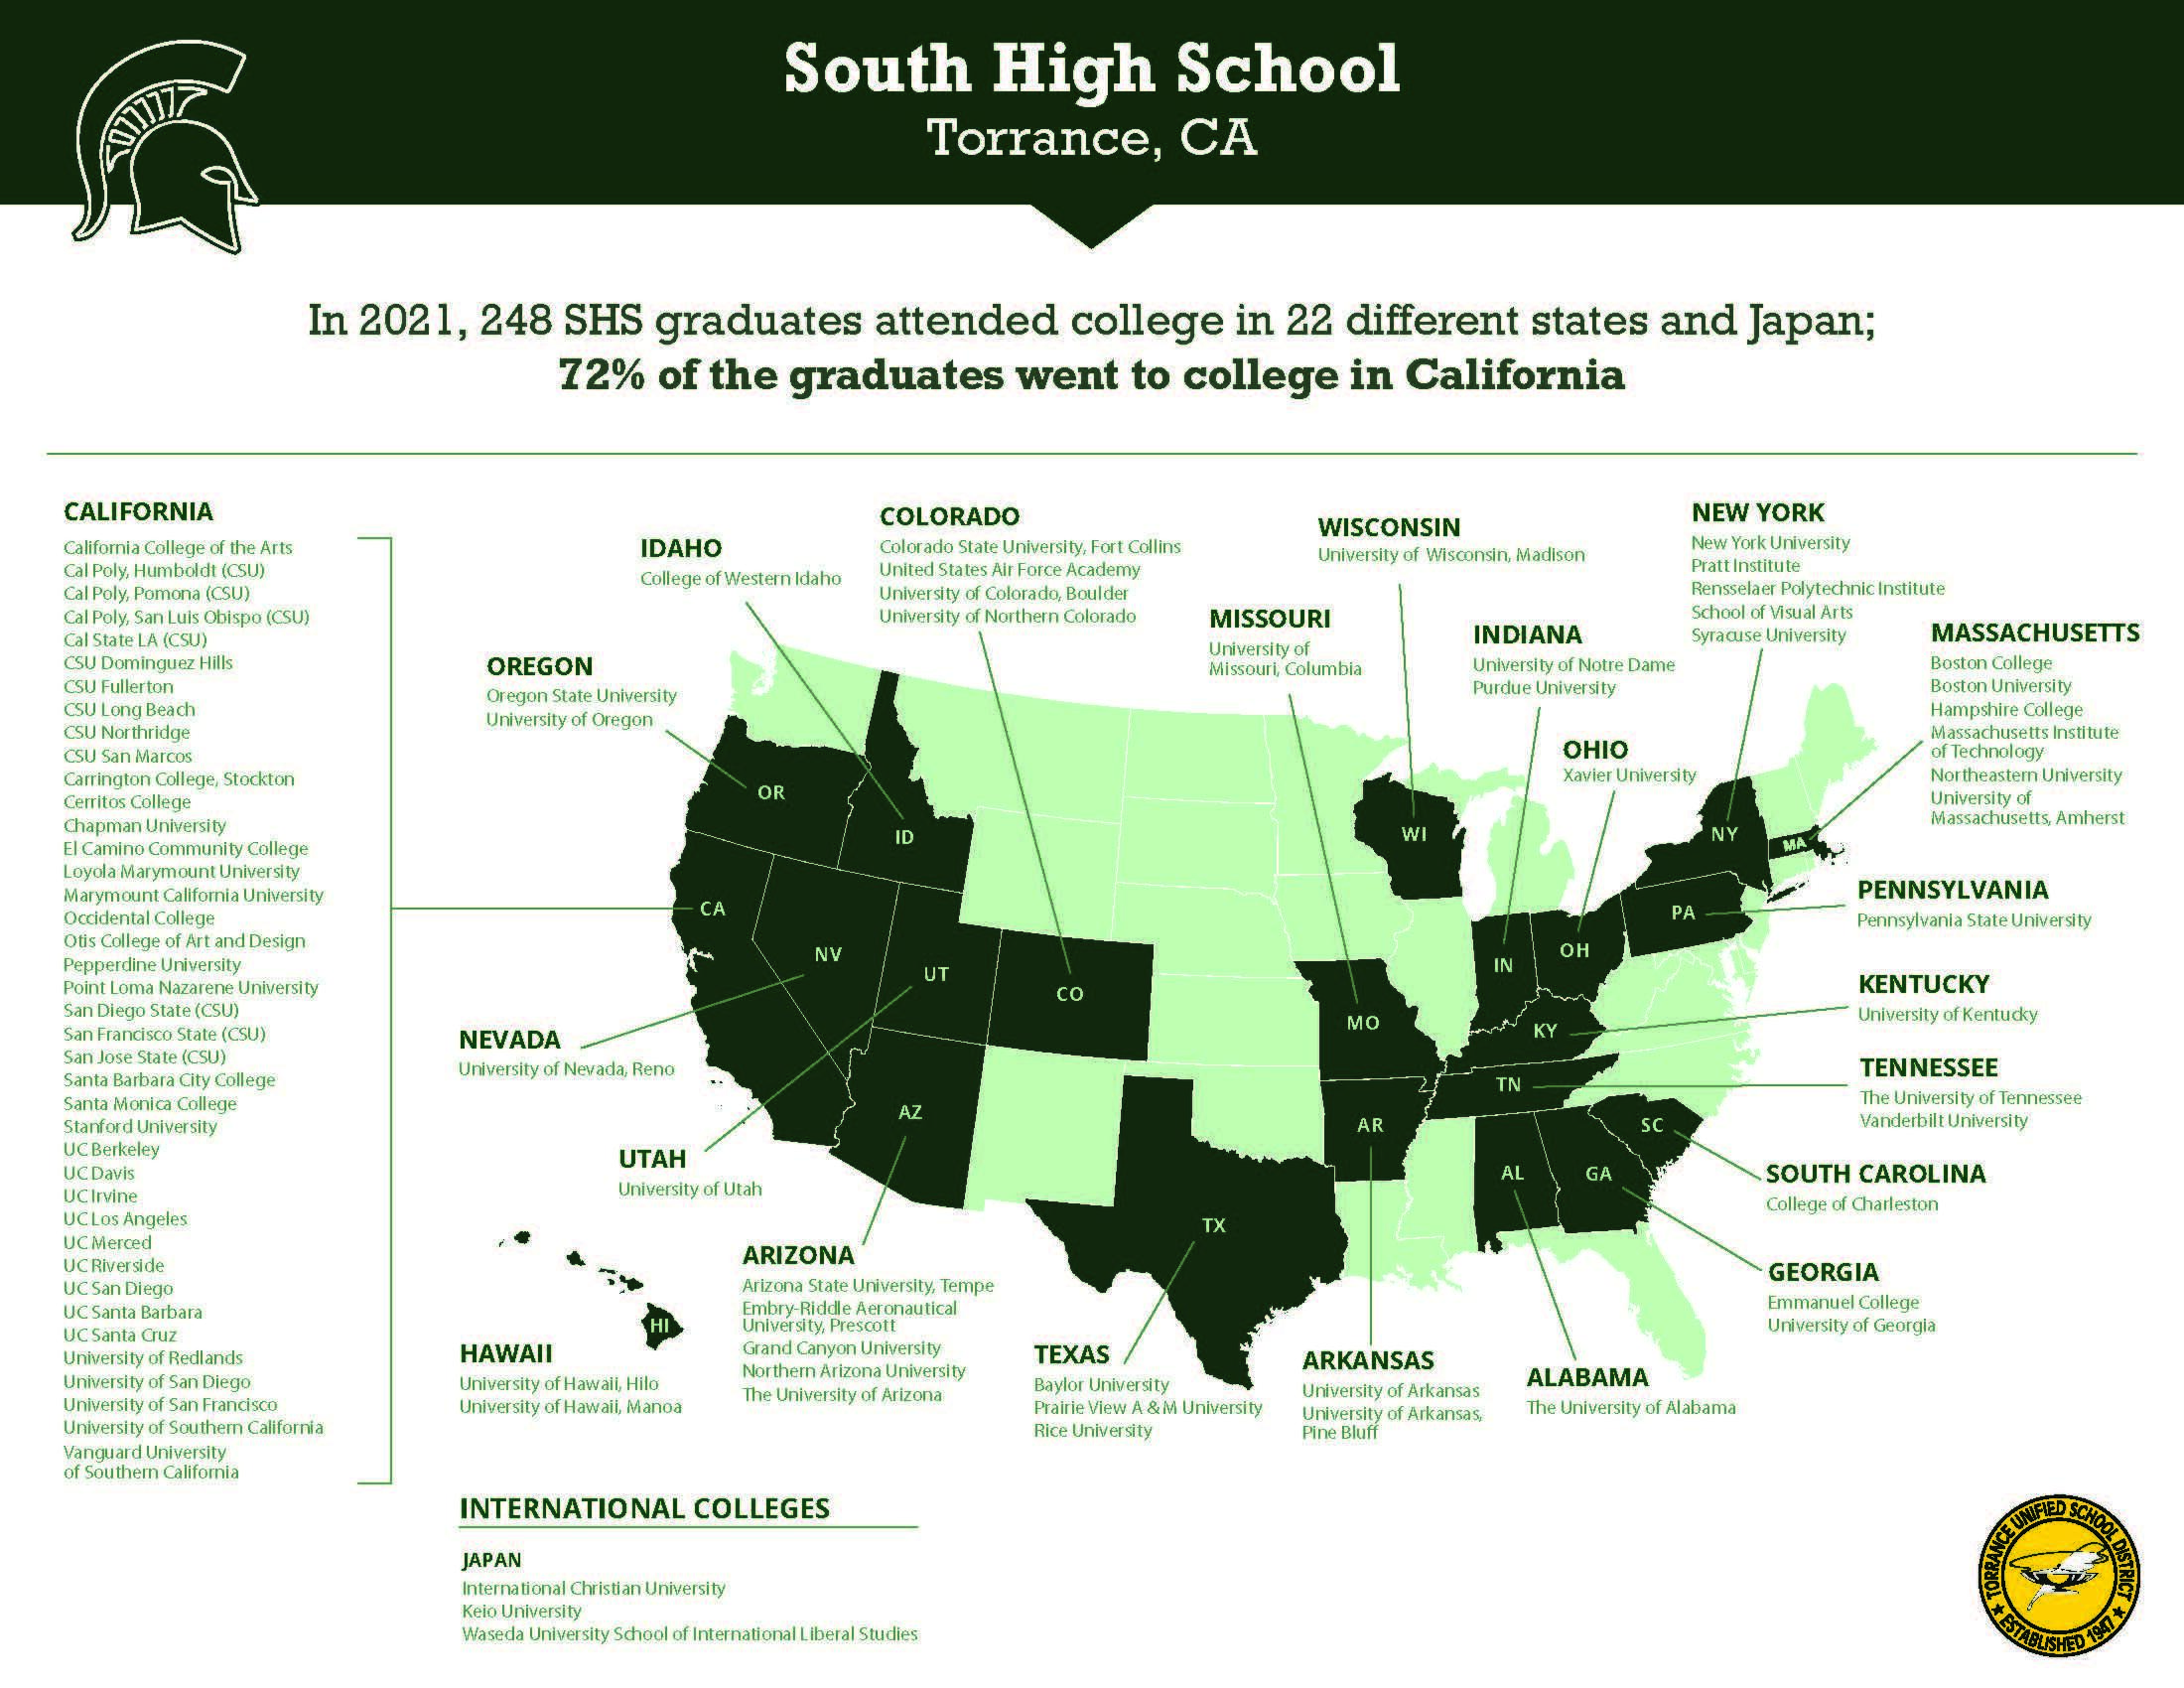 Where SHS Graduates attended college